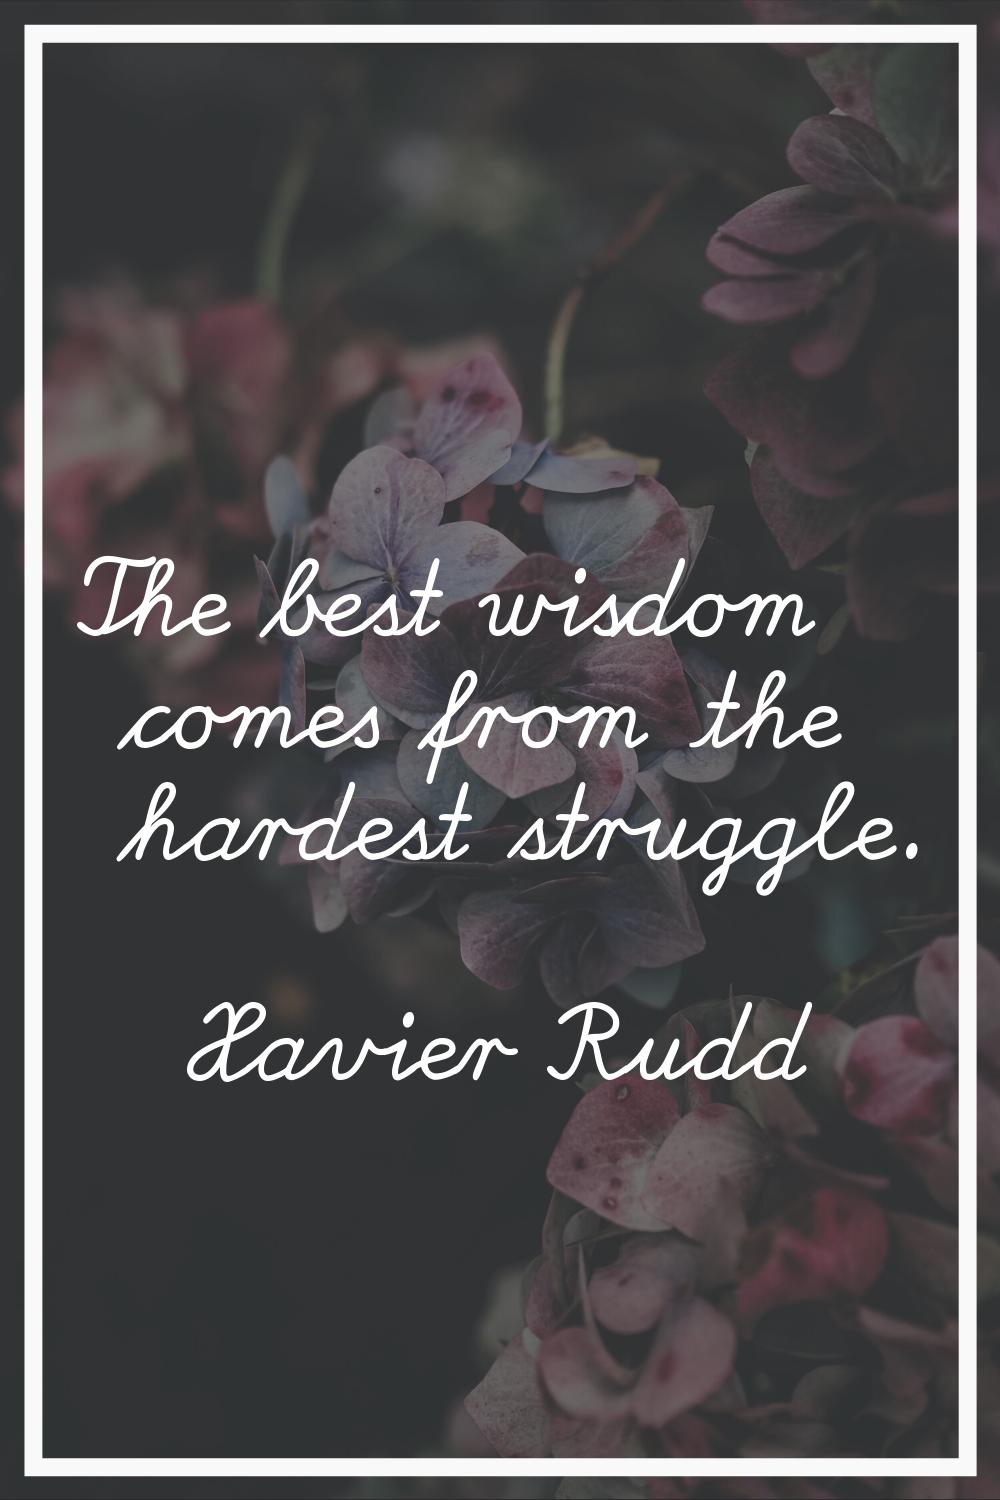 The best wisdom comes from the hardest struggle.